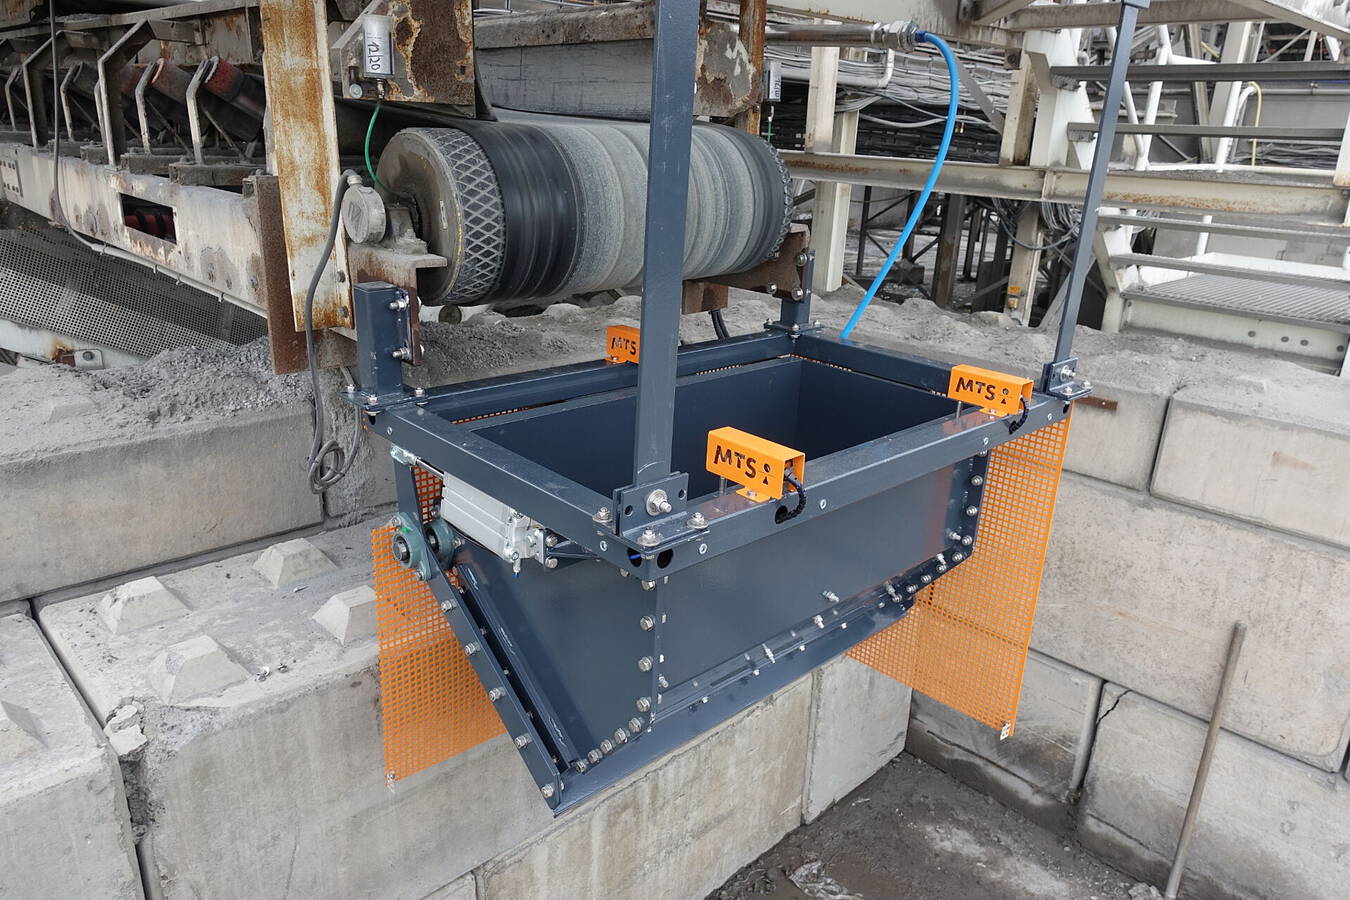 When it’s too little for the belt scale MTS developed the CDW, the conveyor discharge weigher, for low and medium flow rates from 200 to 5,000 kg/h. Weighing is very accurate because it is static.